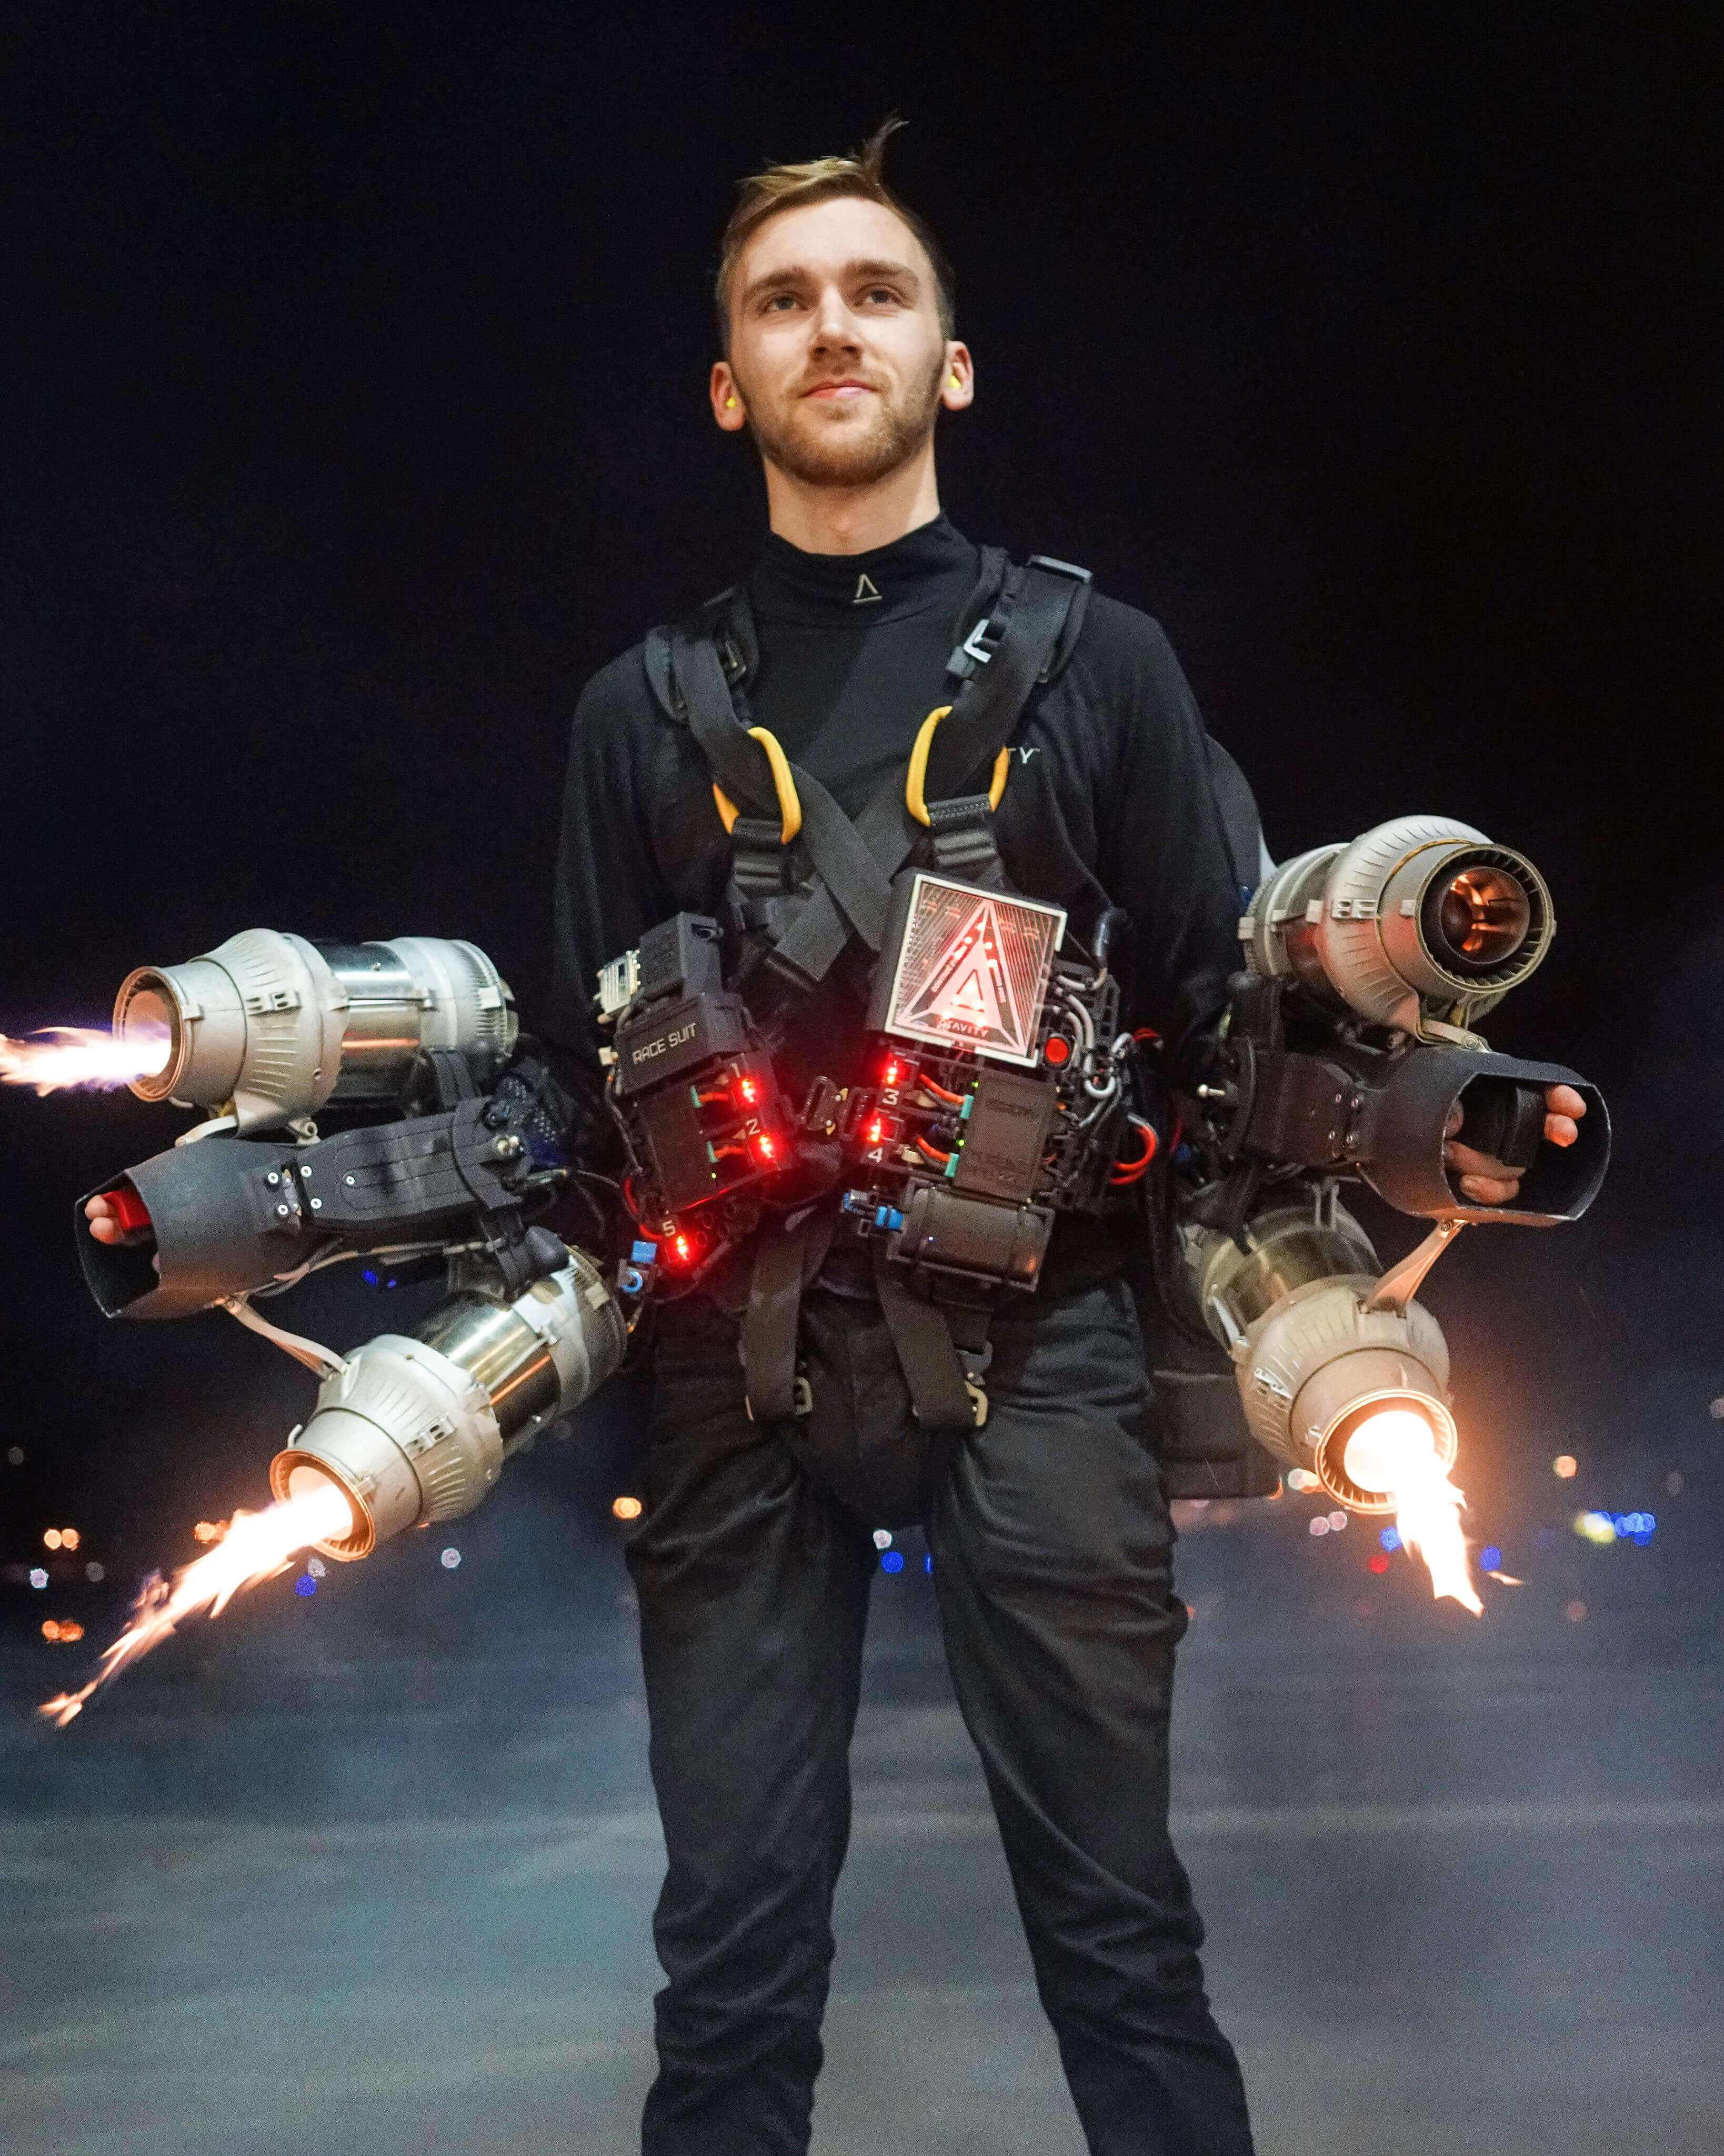 Sam Rogers, founder of AX wearing the Gravity Jet Suit